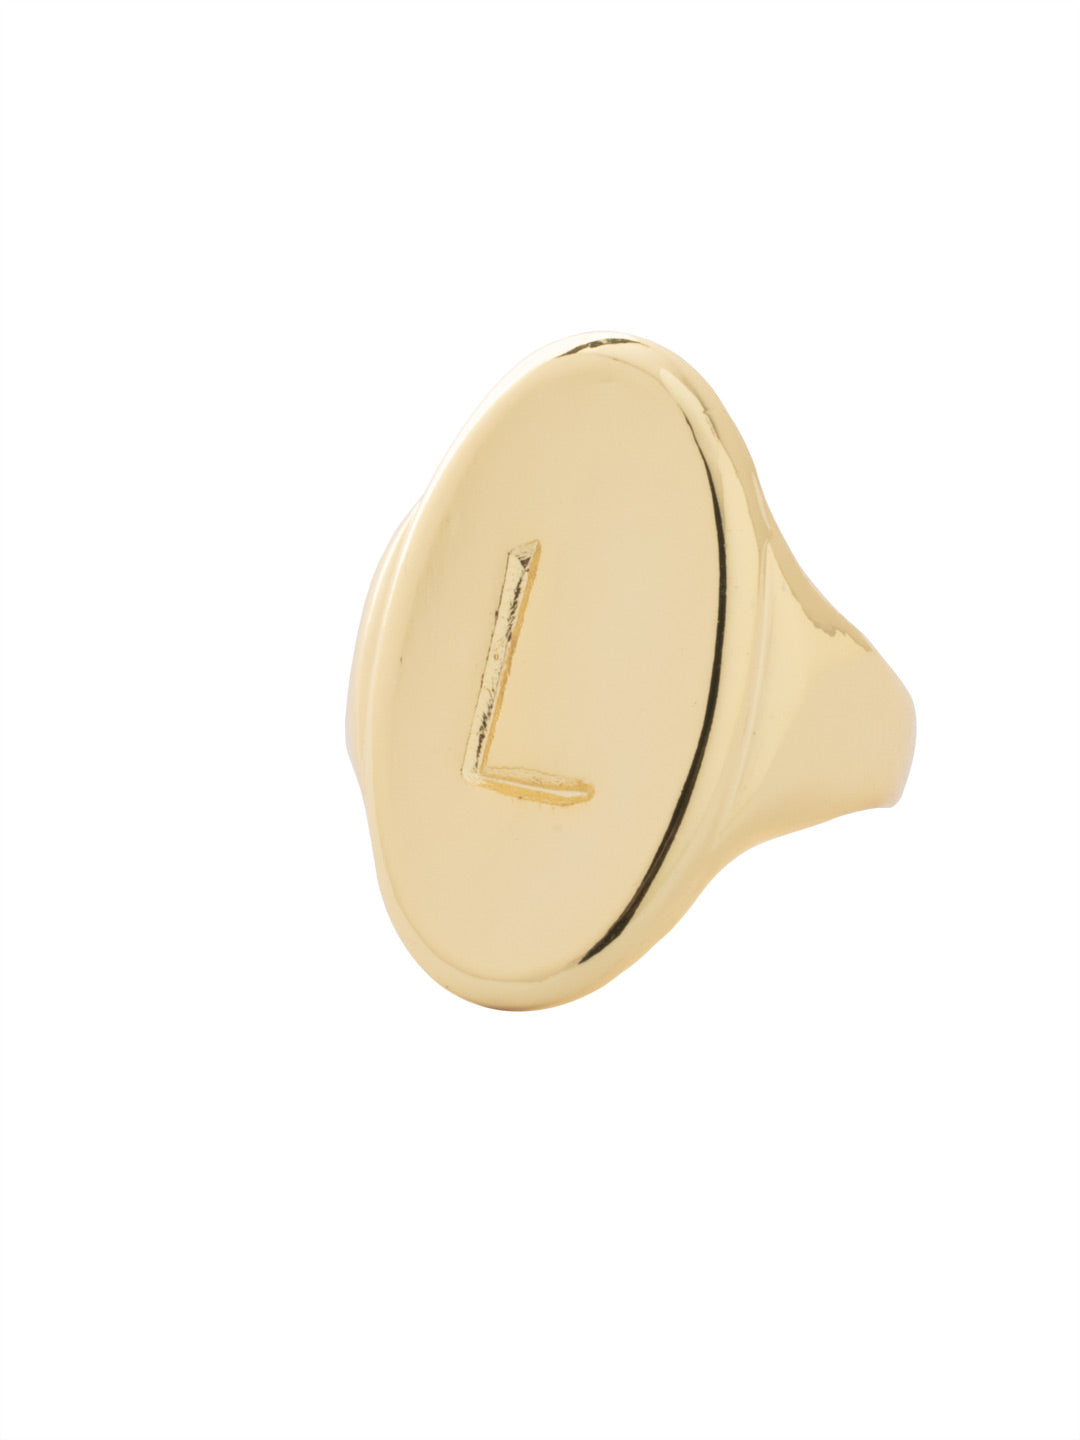 "L" Signet Statement Ring - RFK41BGMTL - <p>The Signet Statement Ring features a capital letter stamped into an oblong metal disk on an adjustable ring band. From Sorrelli's Bare Metallic collection in our Bright Gold-tone finish.</p>